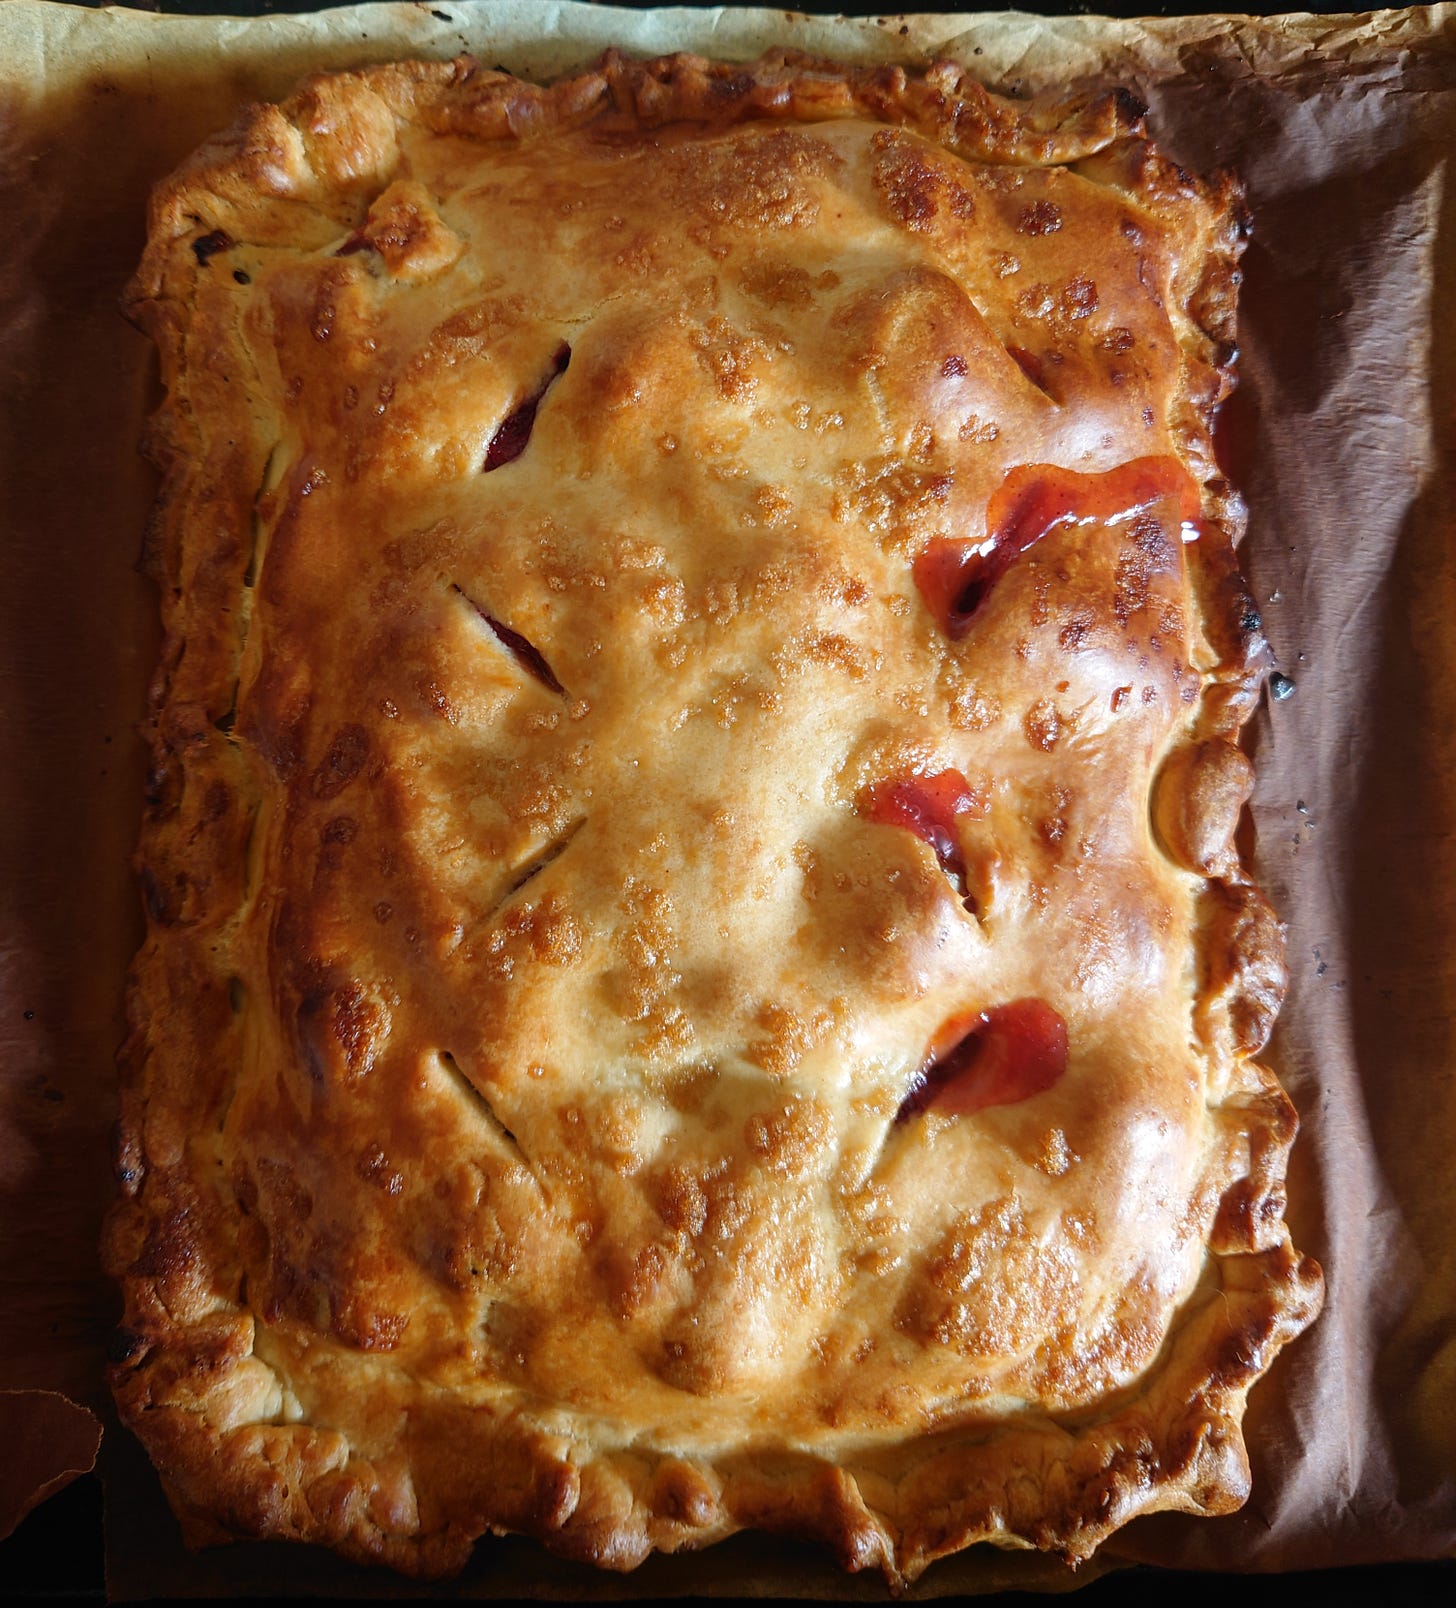 A rectangular golden-crust pie leaking red fruit juice from one of the slits in its crust, 